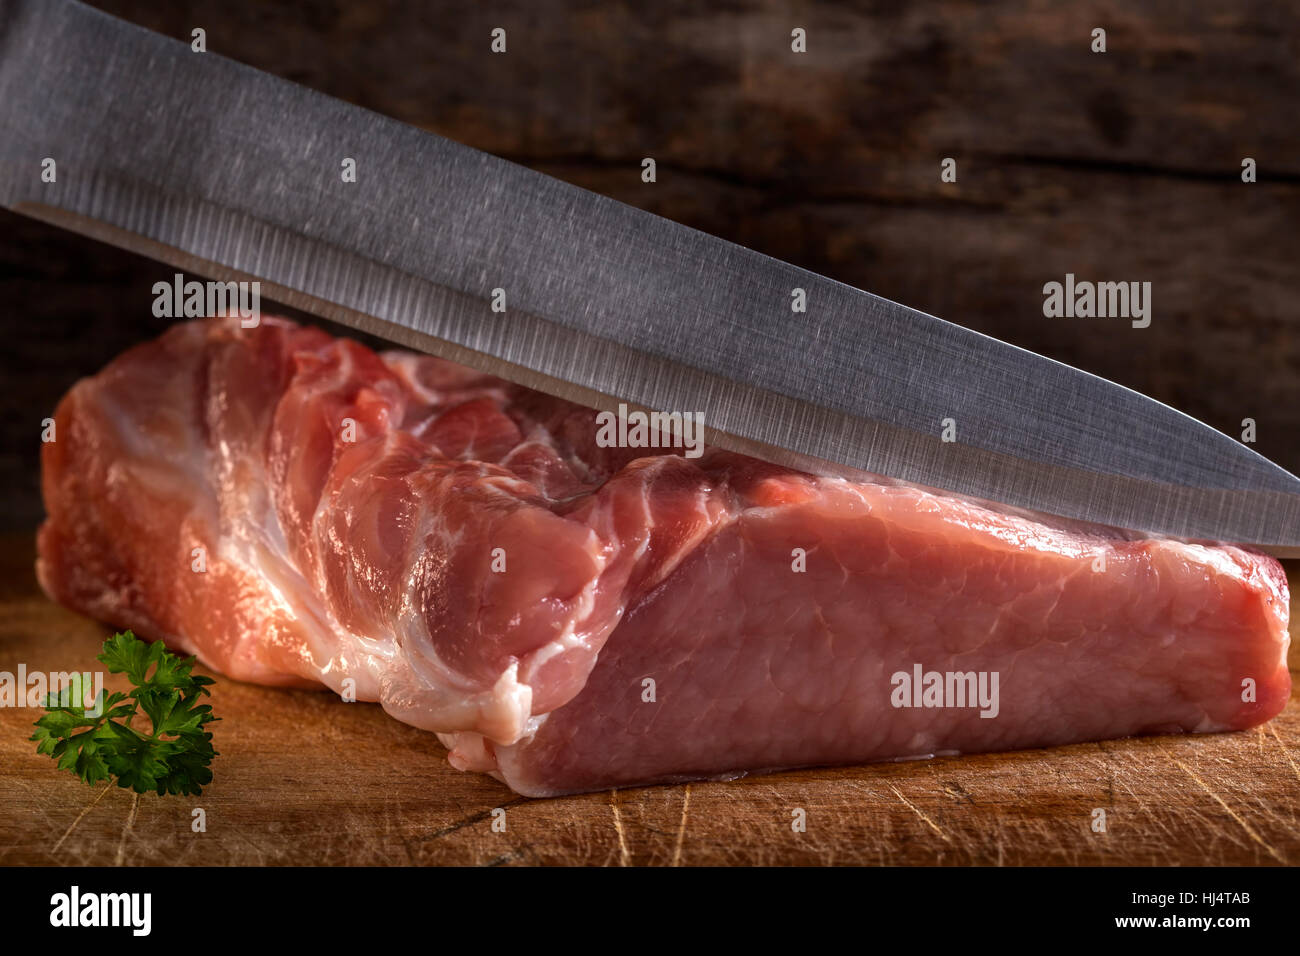 Cutting raw pork muscle with knife over wooden background Stock Photo